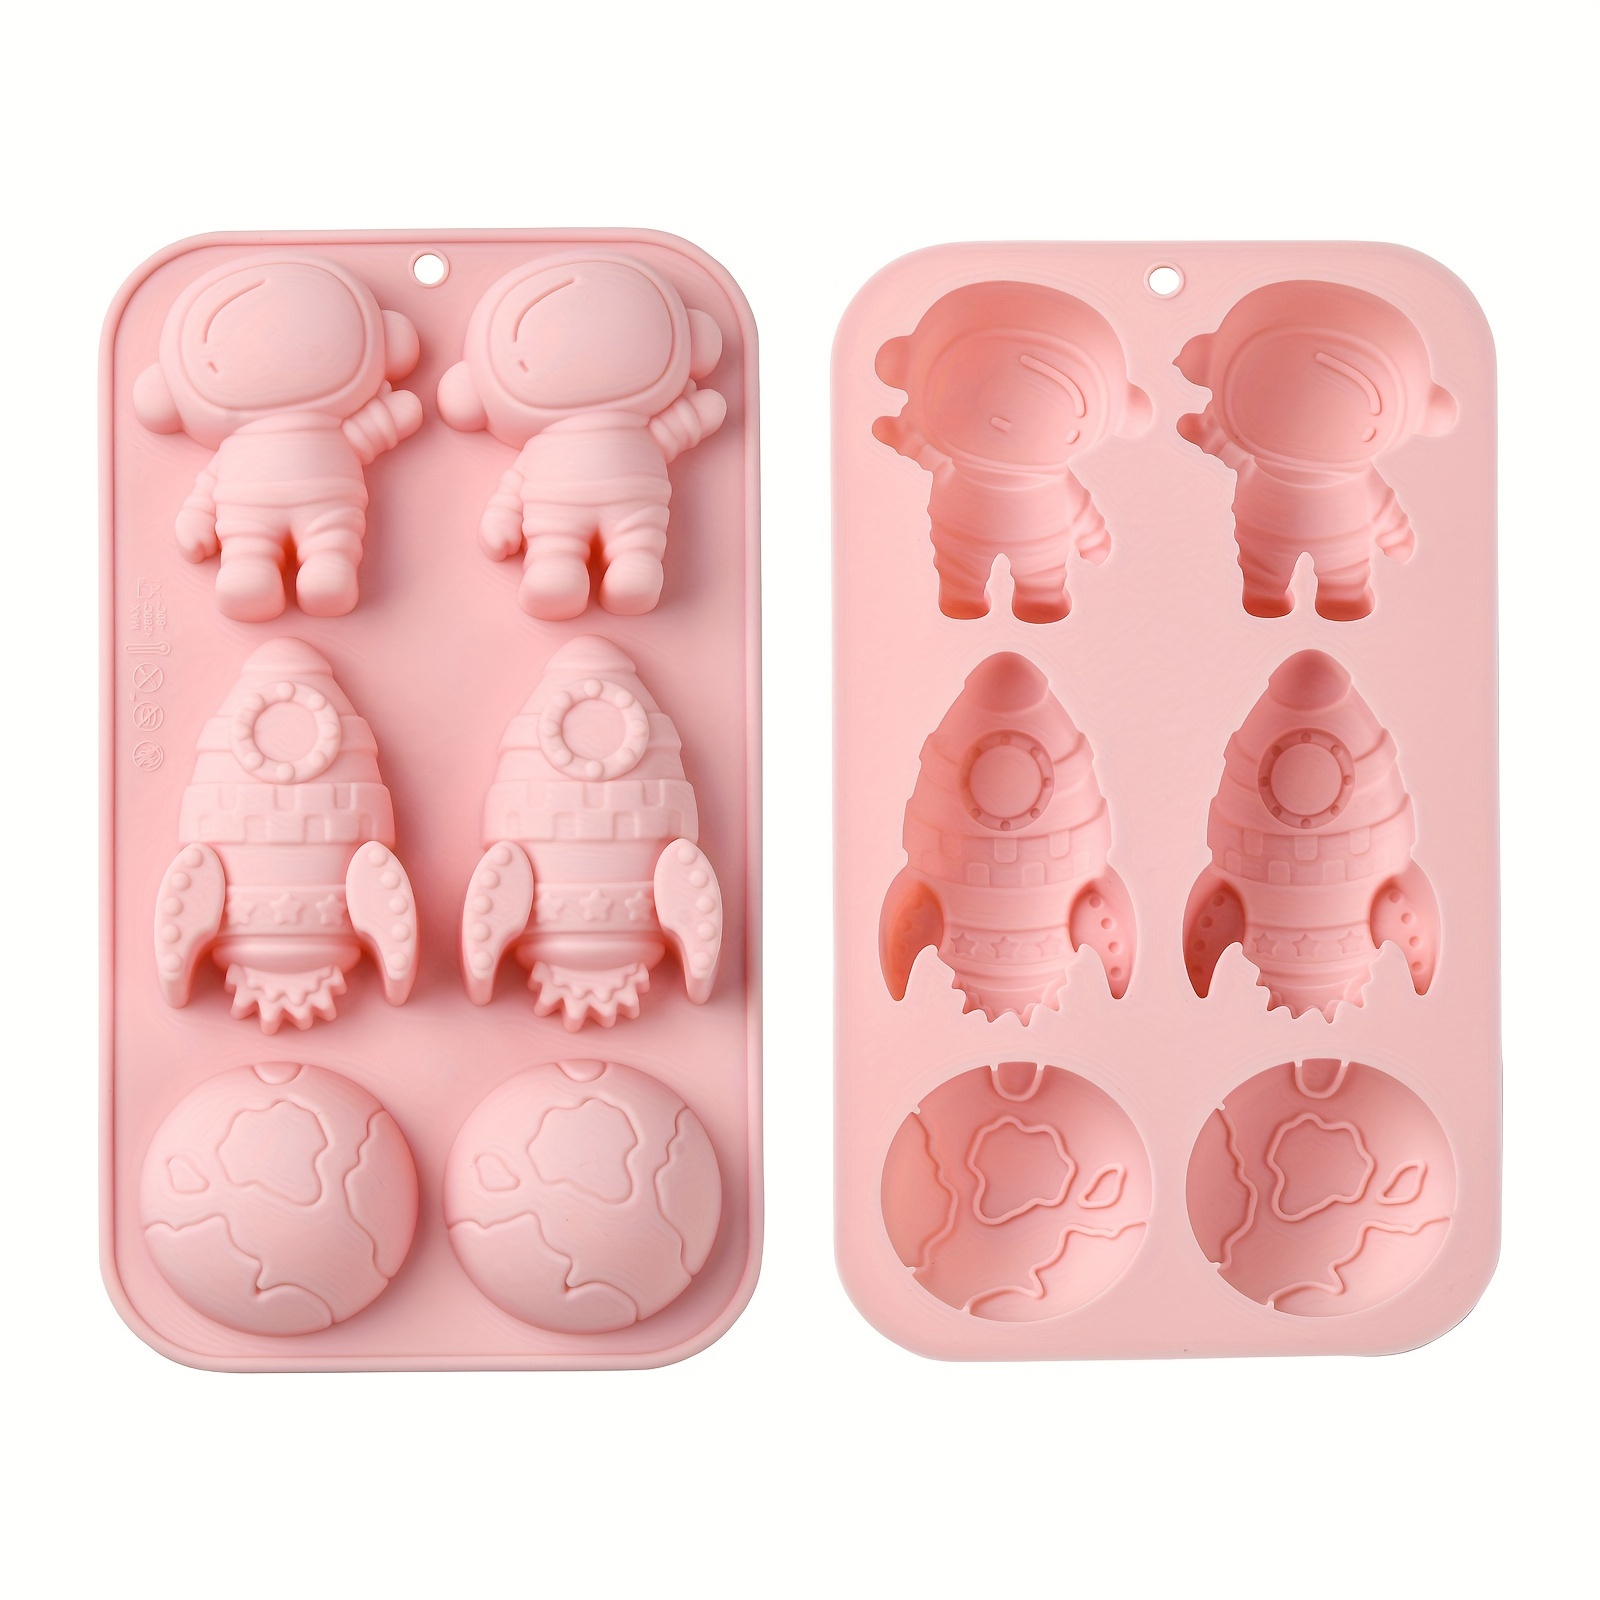 

2pcs Diy Pink Astronaut Rocket Hemisphere Silicone Molds Fondant Cake Baking Molds Resin Casting Molds For Chocolate Candy Resin Craft Making